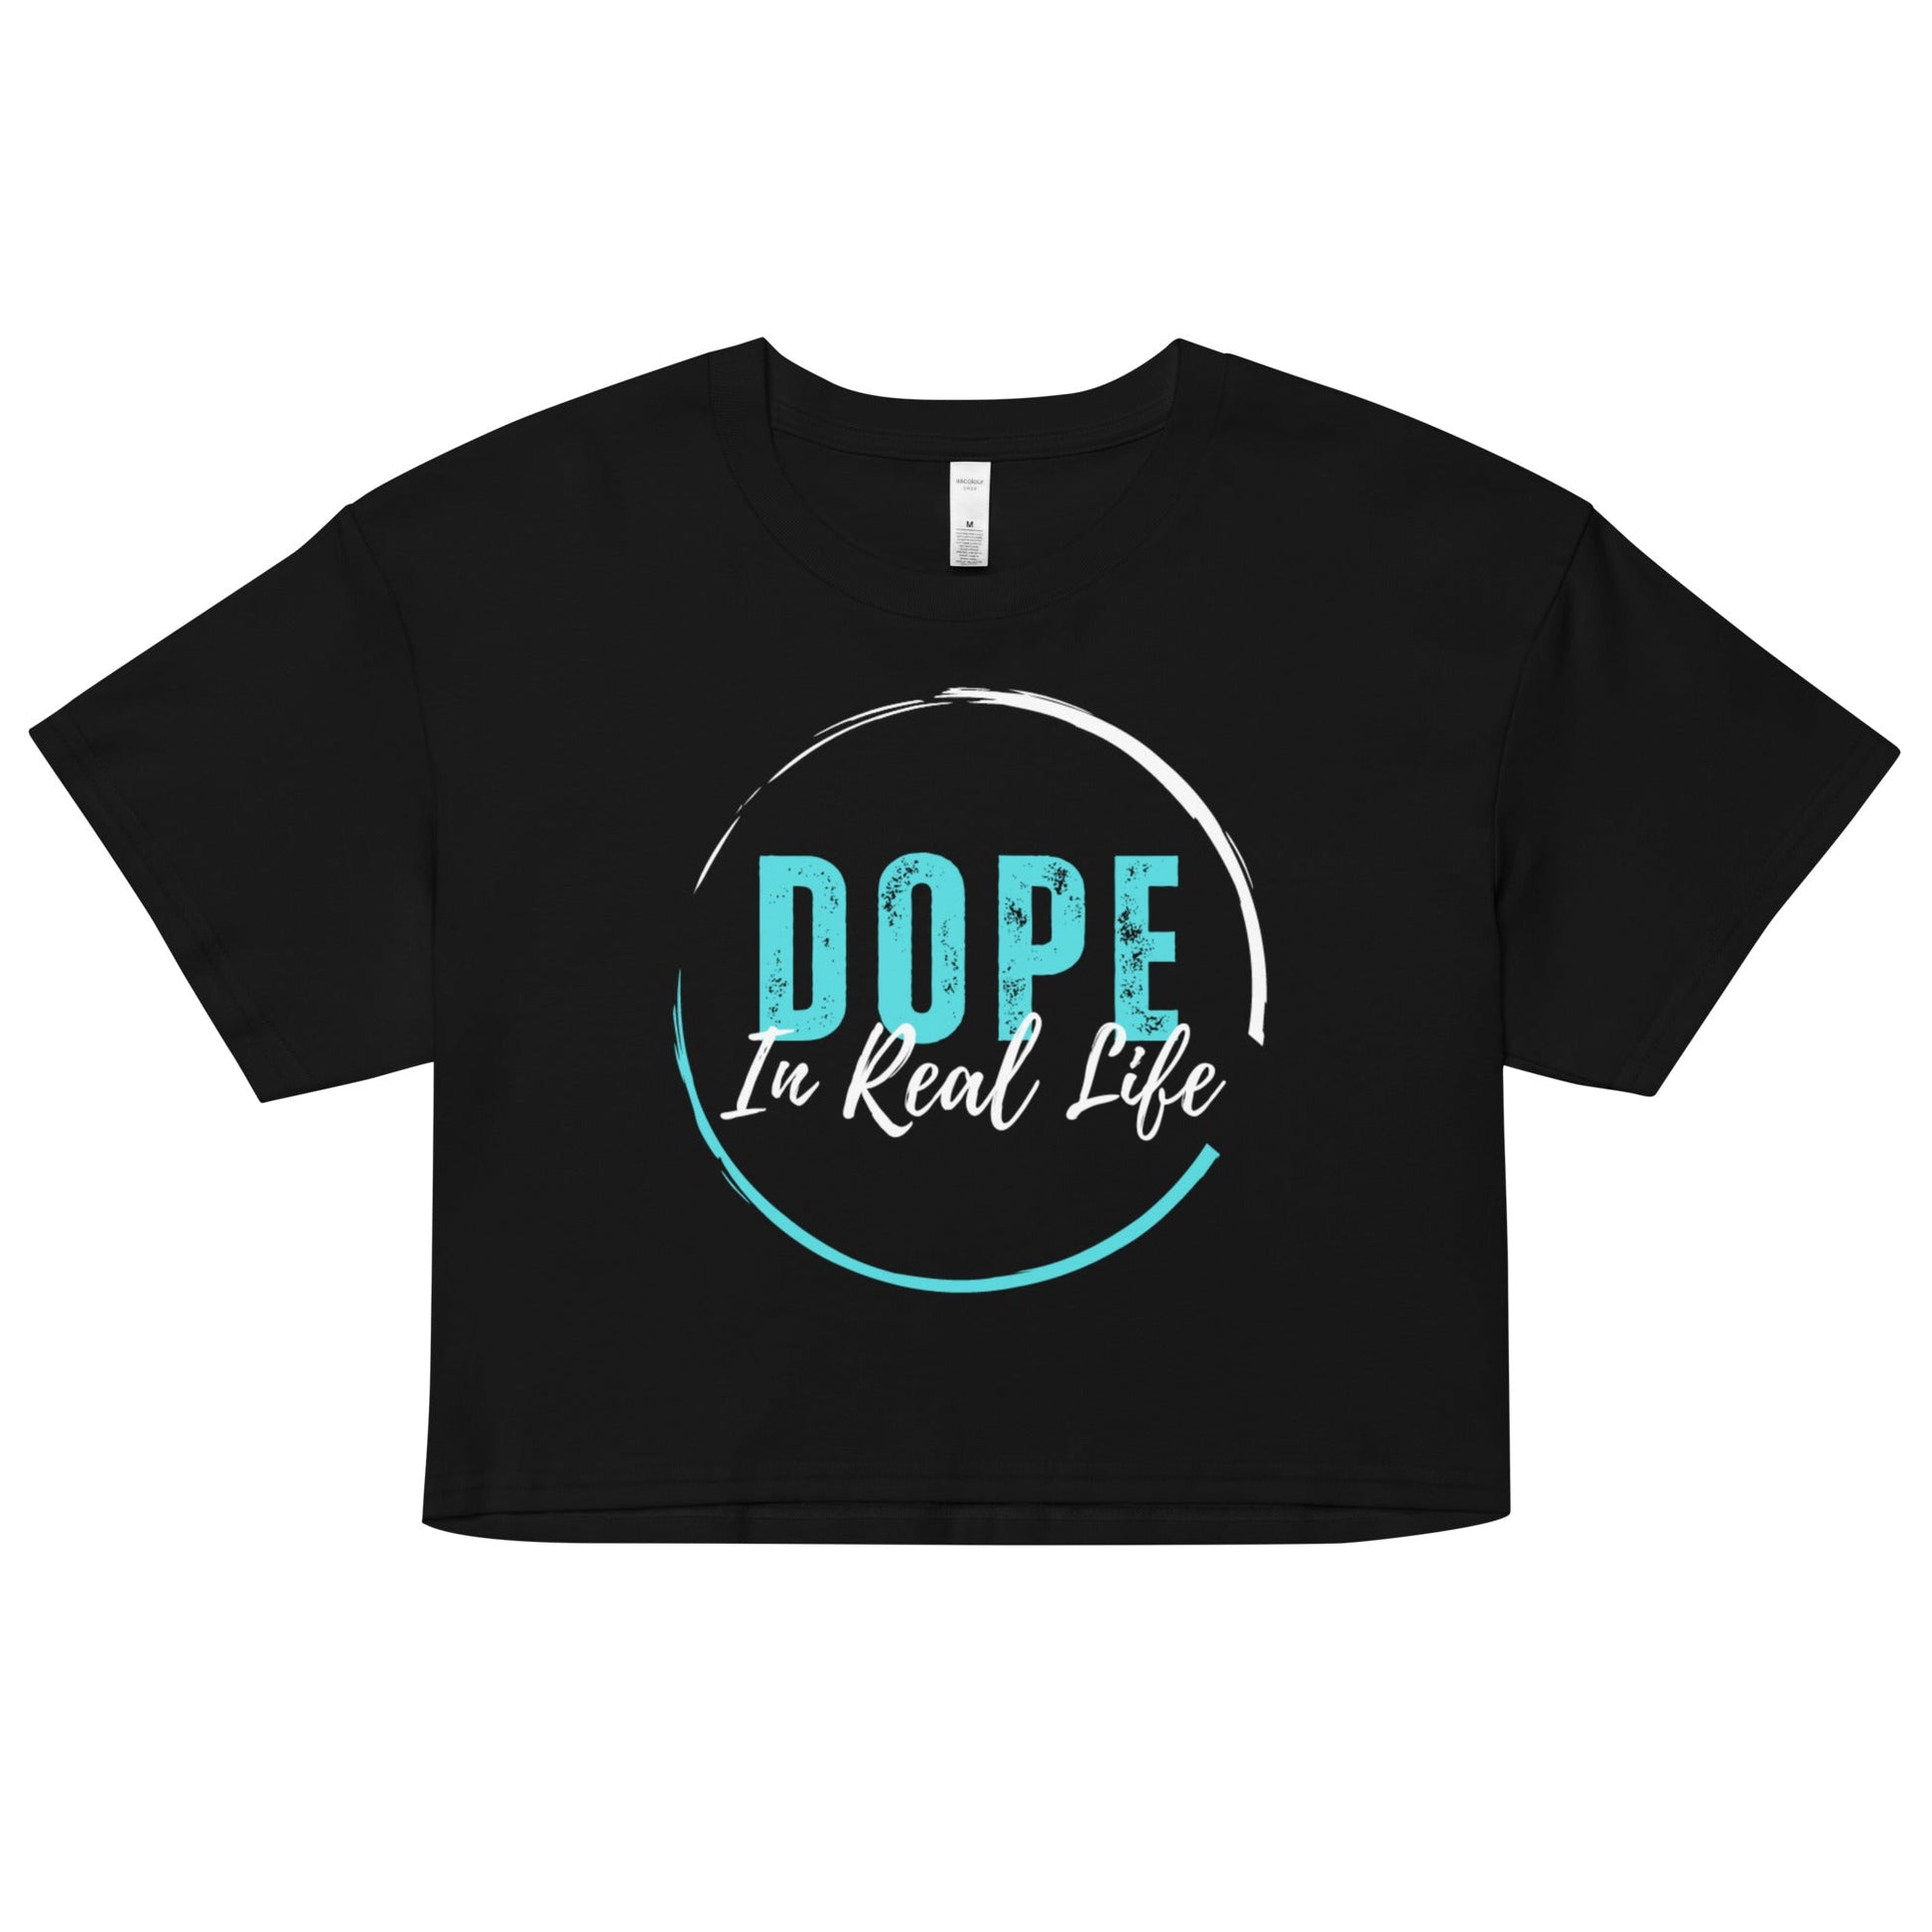 Dope In Real Life Women’s crop top - Catch This Tea Shirts